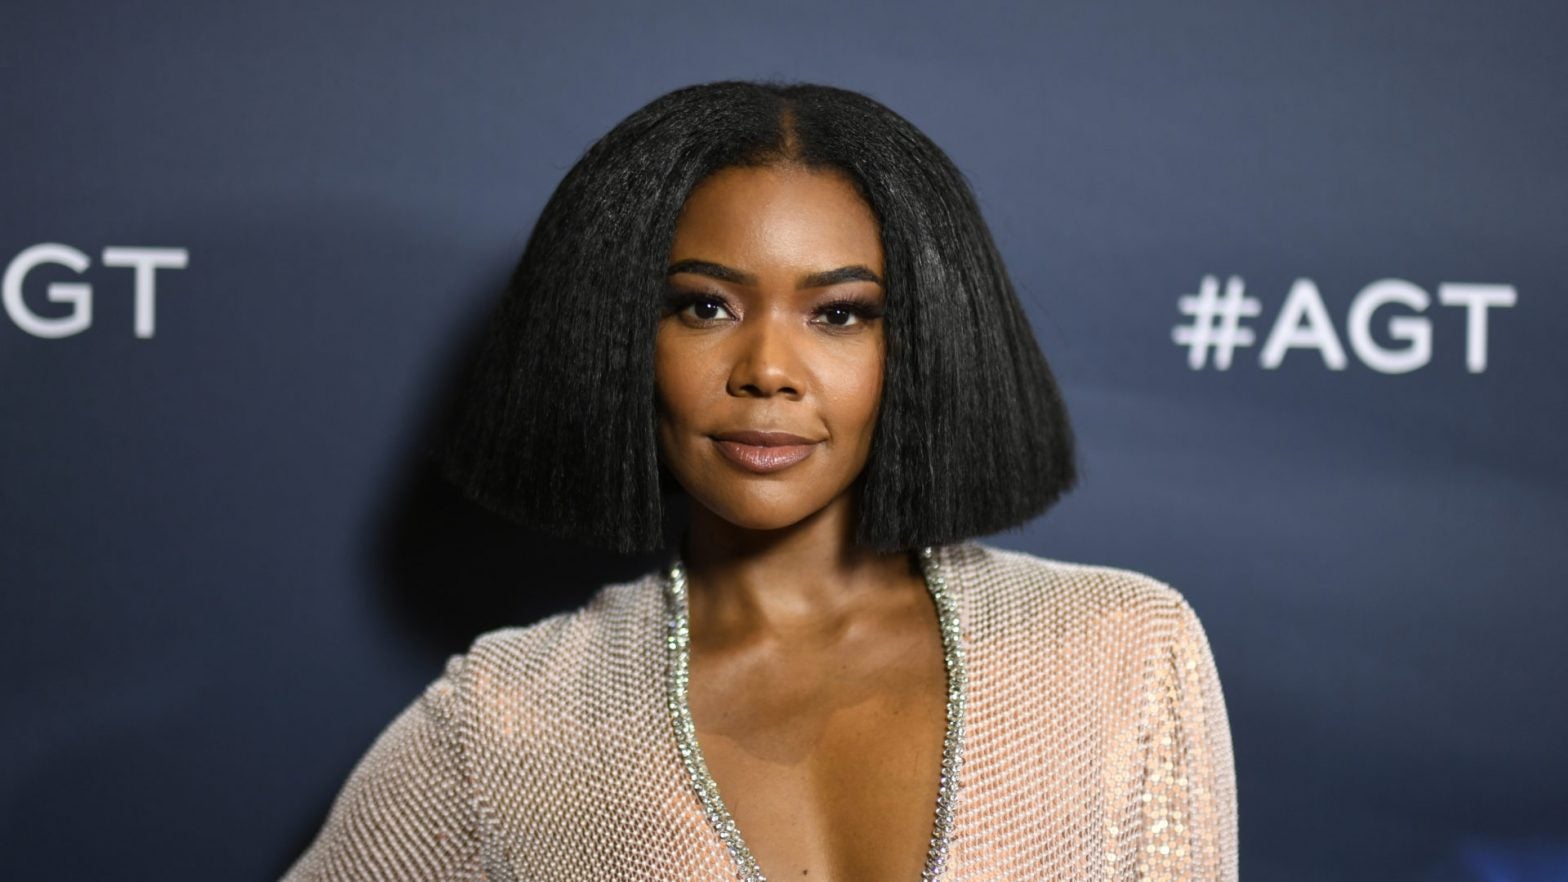 Gabrielle Union Claps Back At Terry Crews Saying 'America's Got Talent' Was 'Most Diverse'